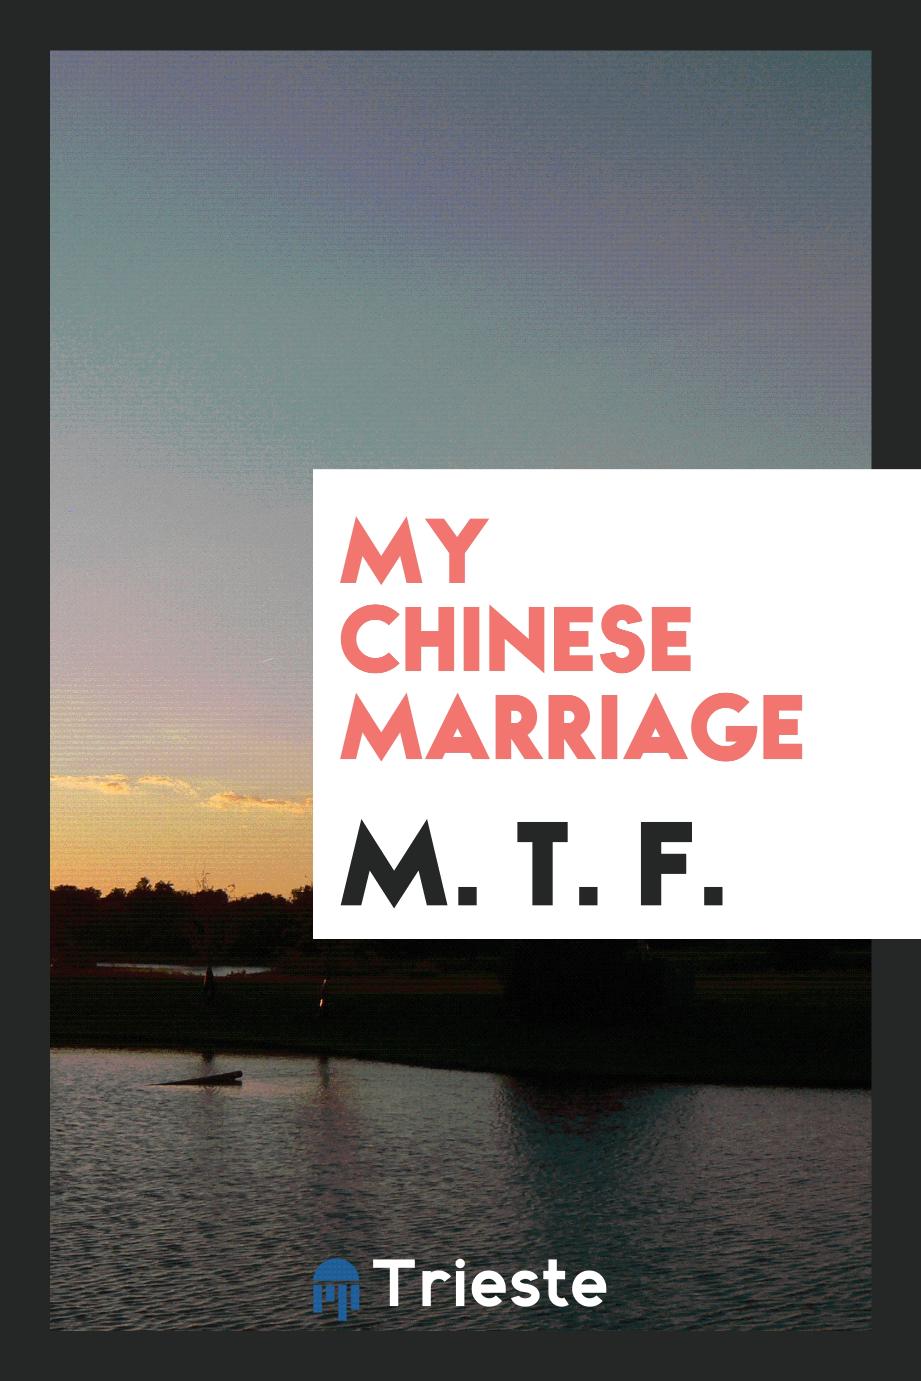 My Chinese marriage